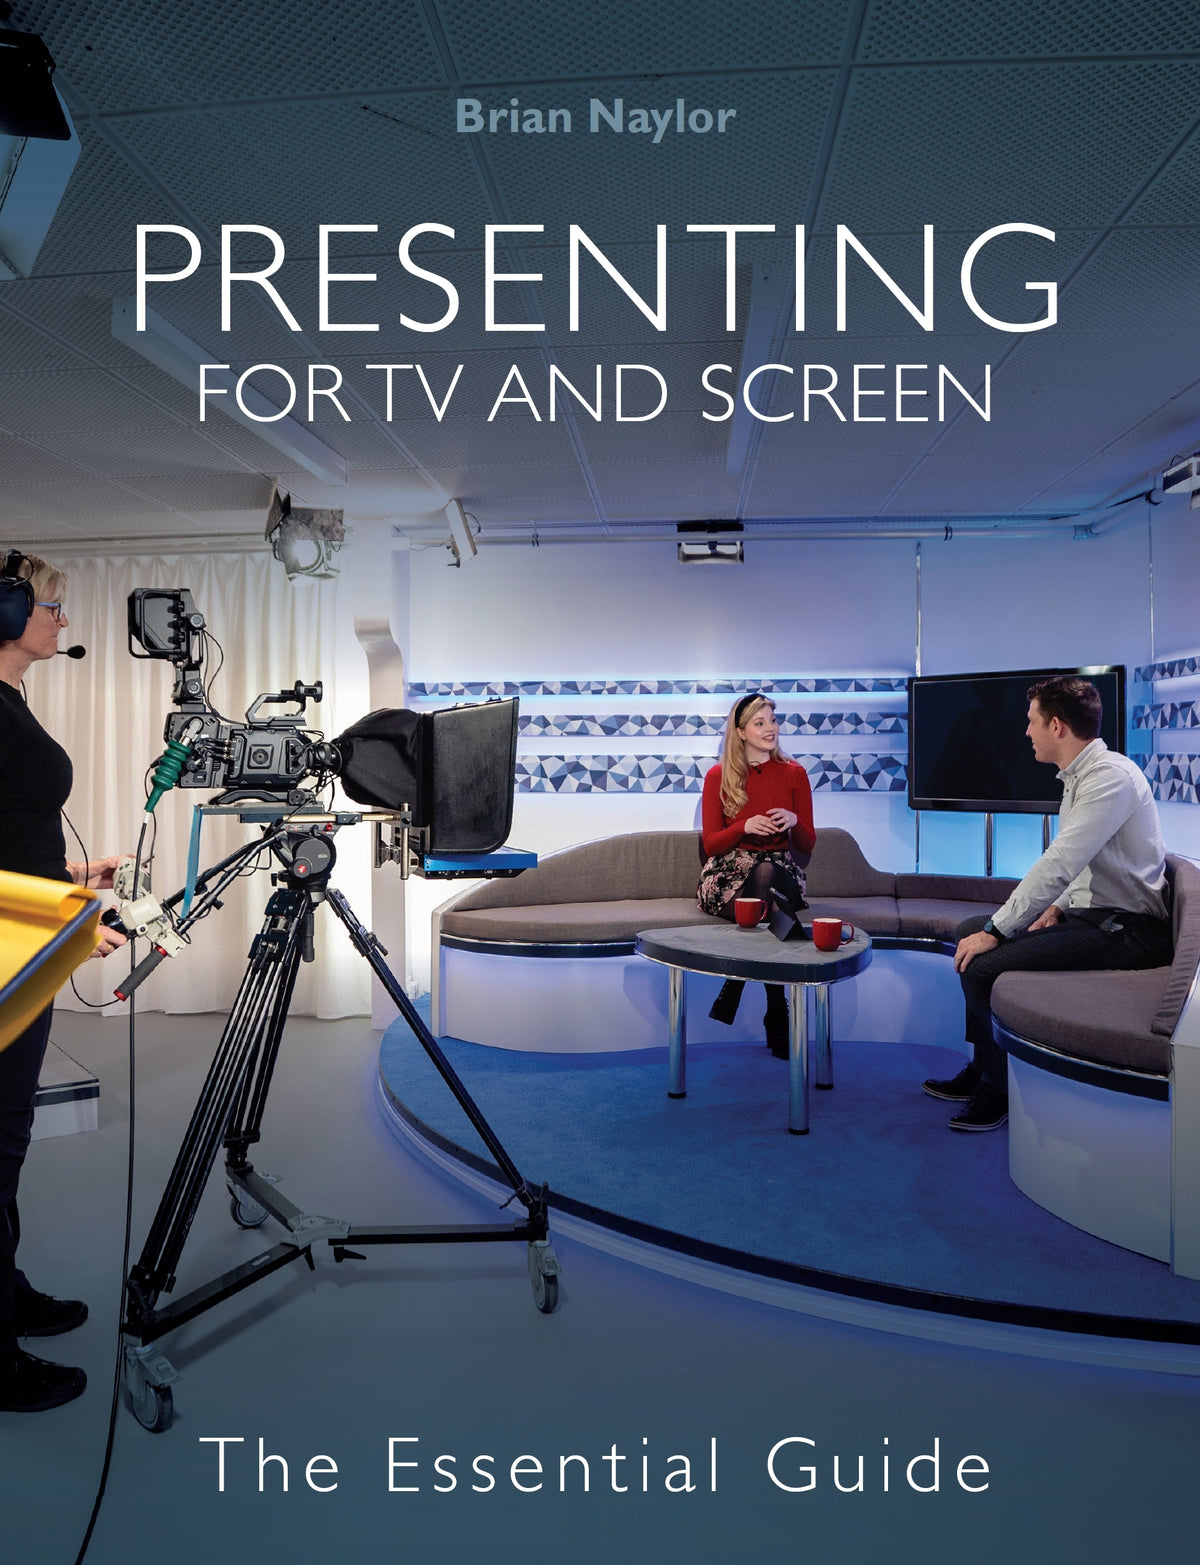 Presenting for TV and Screen